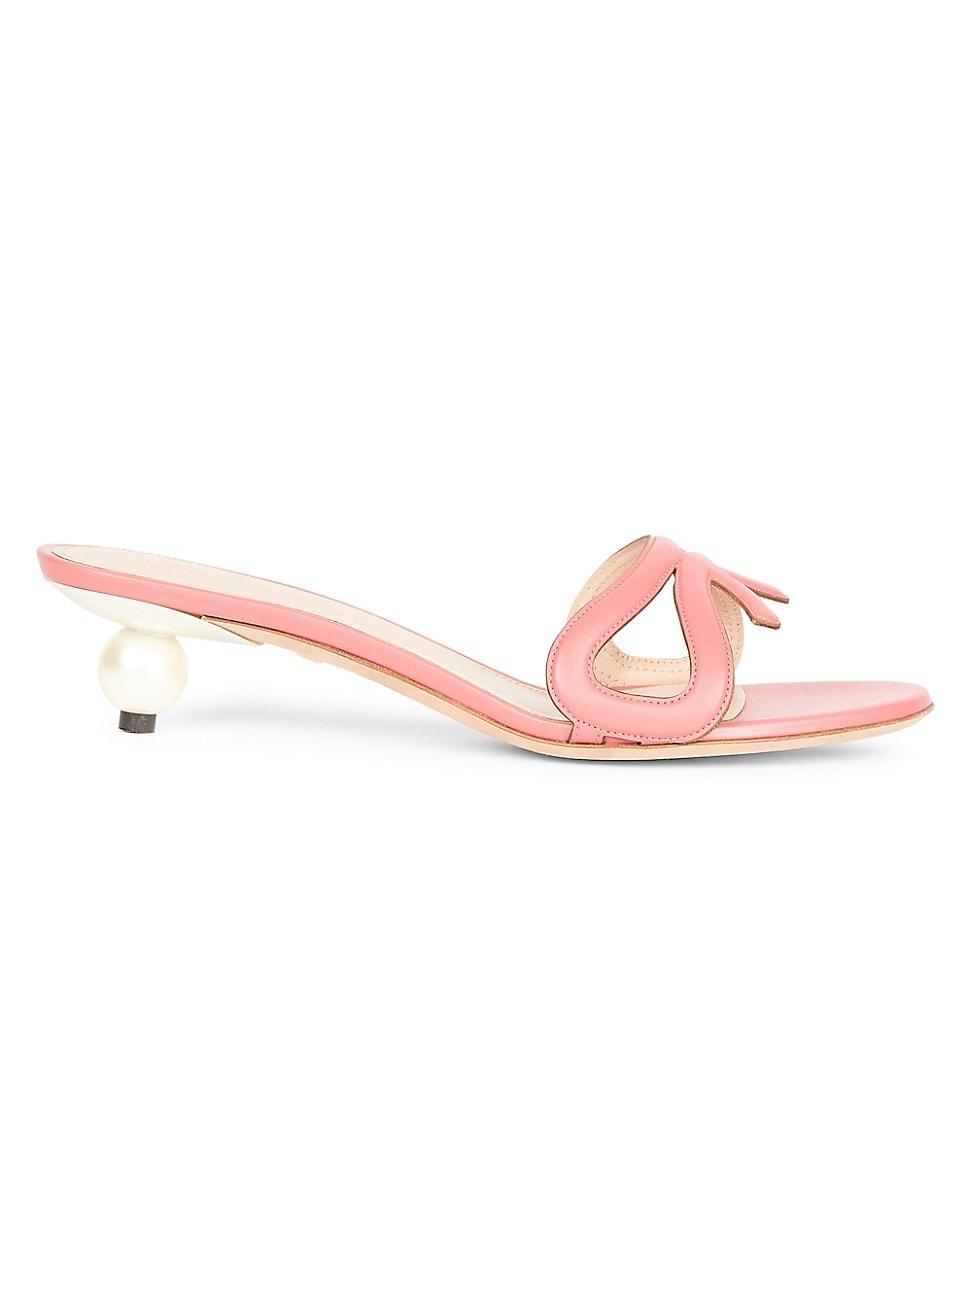 Leather Bow Pearly Slide Sandals Product Image